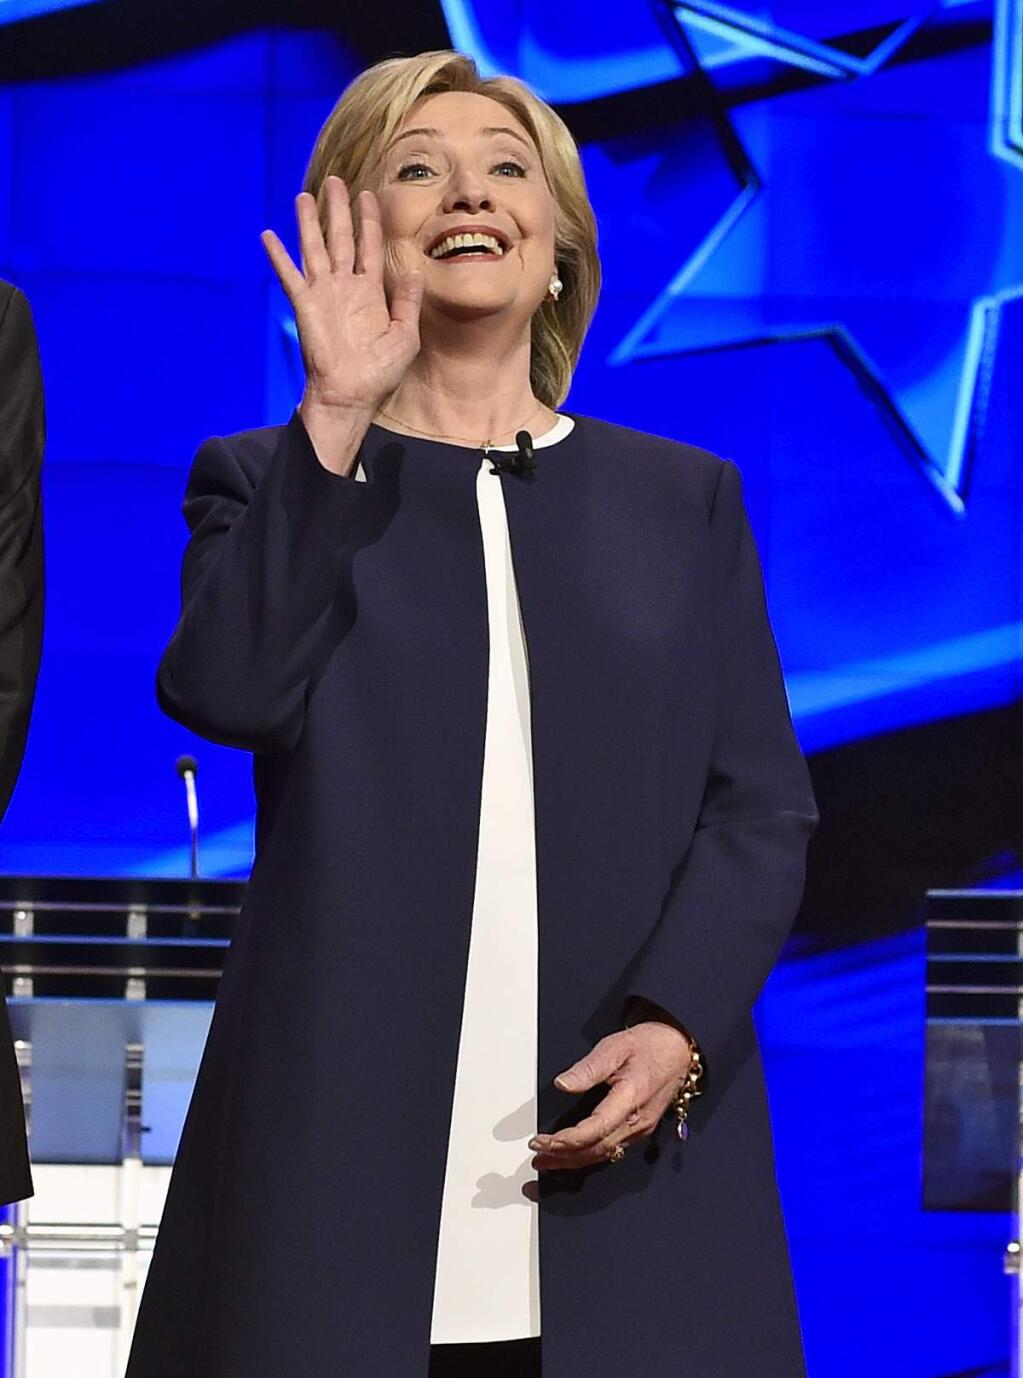 Democratic presidential candidate Hillary Rodham Clinton waves as she takes the stage before the CNN Democratic presidential debate Tuesday, Oct. 13, 2015, in Las Vegas. (AP Photo/David Becker)